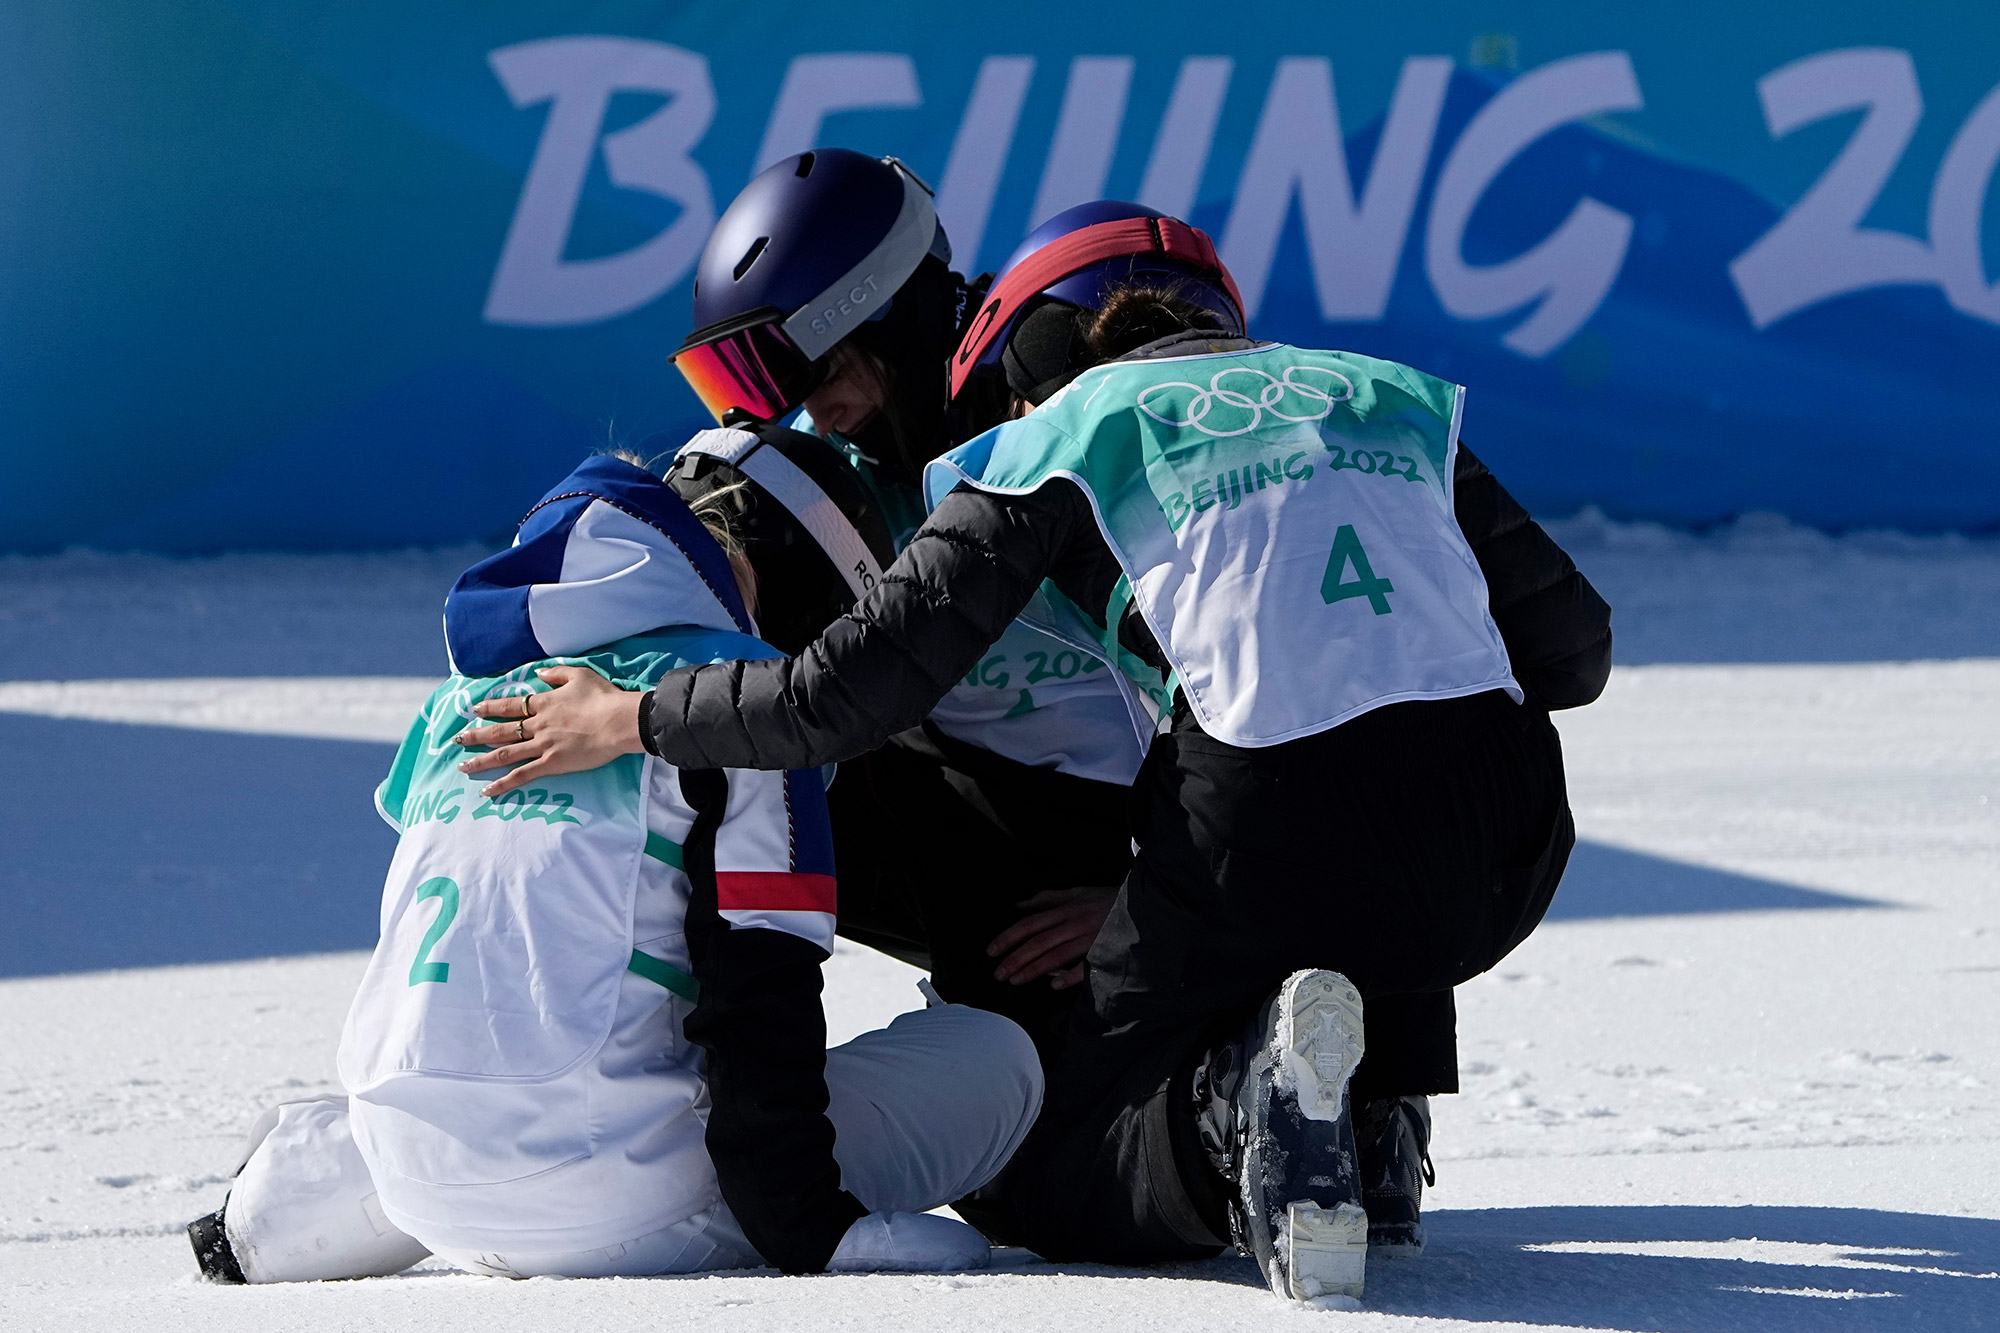 Silver medalist Tess Ledeux of France, left, is comforted by gold medalist Eileen Gu of China and bronze medalist Mathilde Gremaud of Switzerland during the freestyle skiing big air finals on Tuesday.